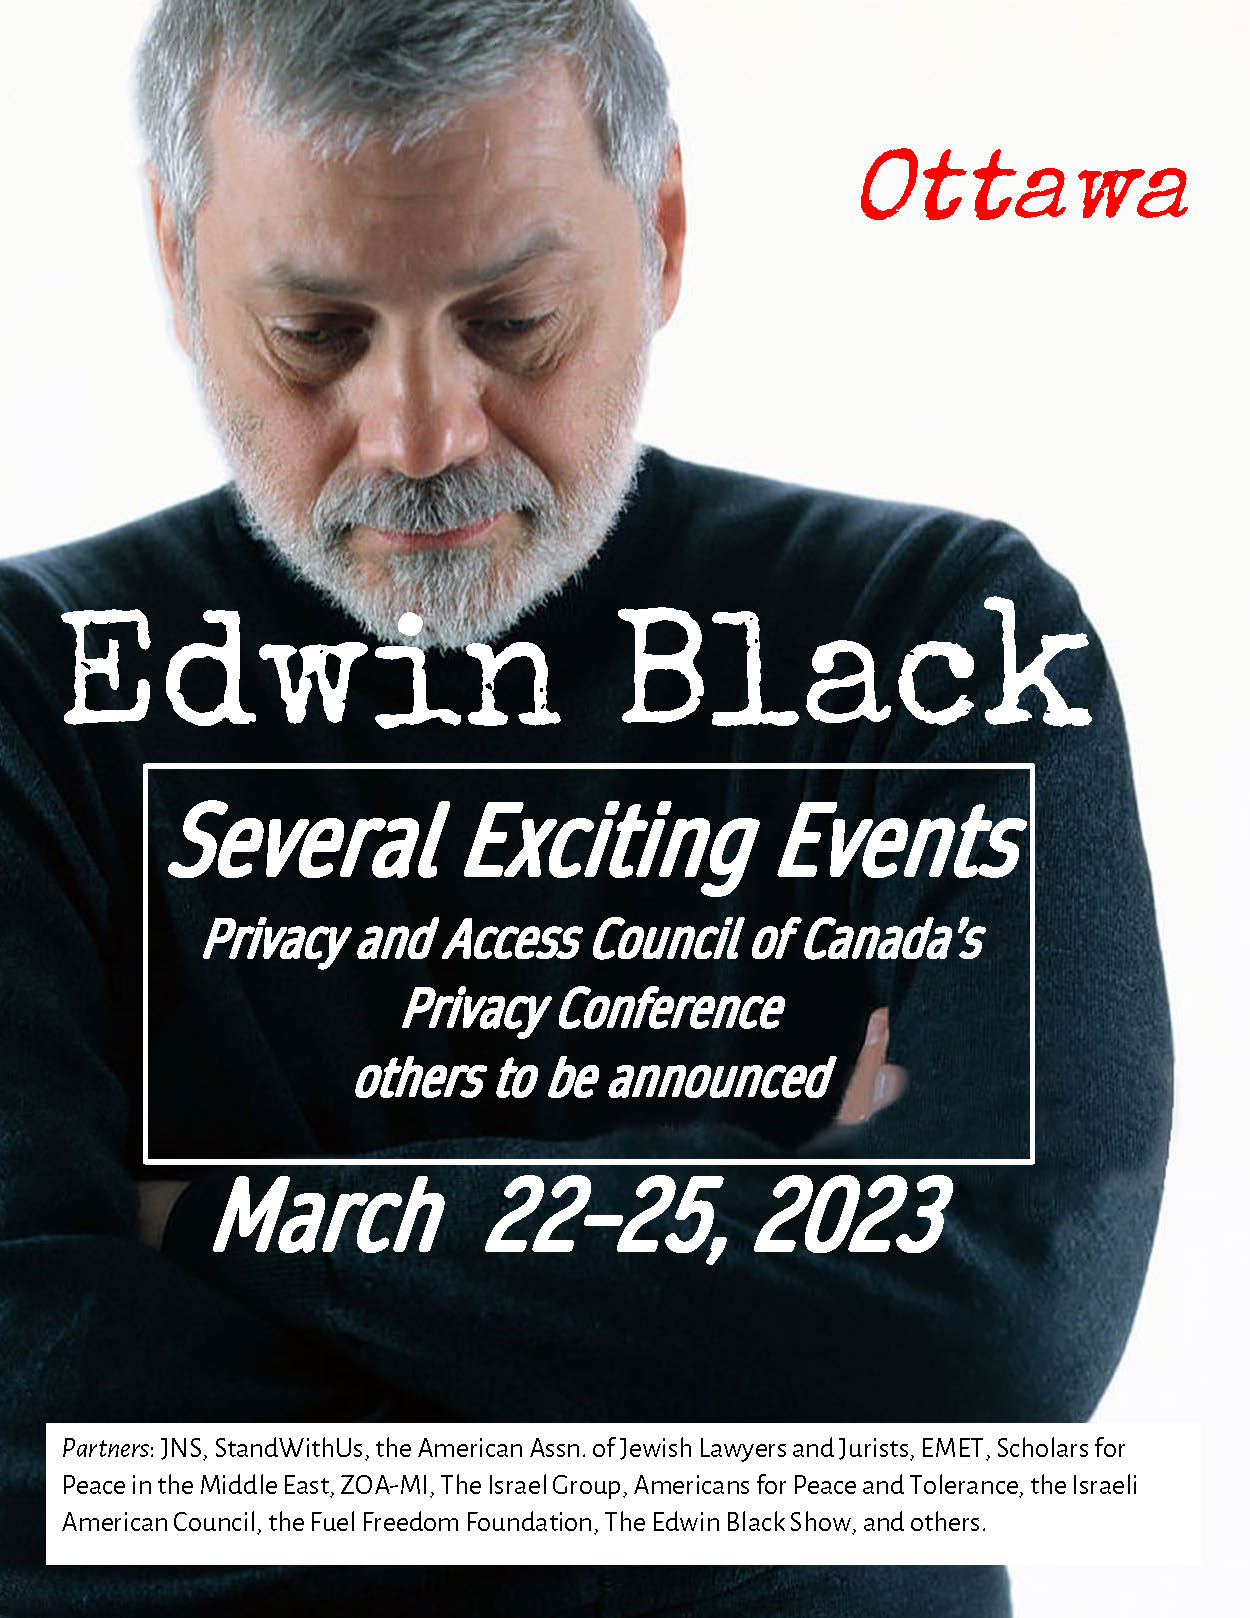 Special Events: Ottawa March 2023